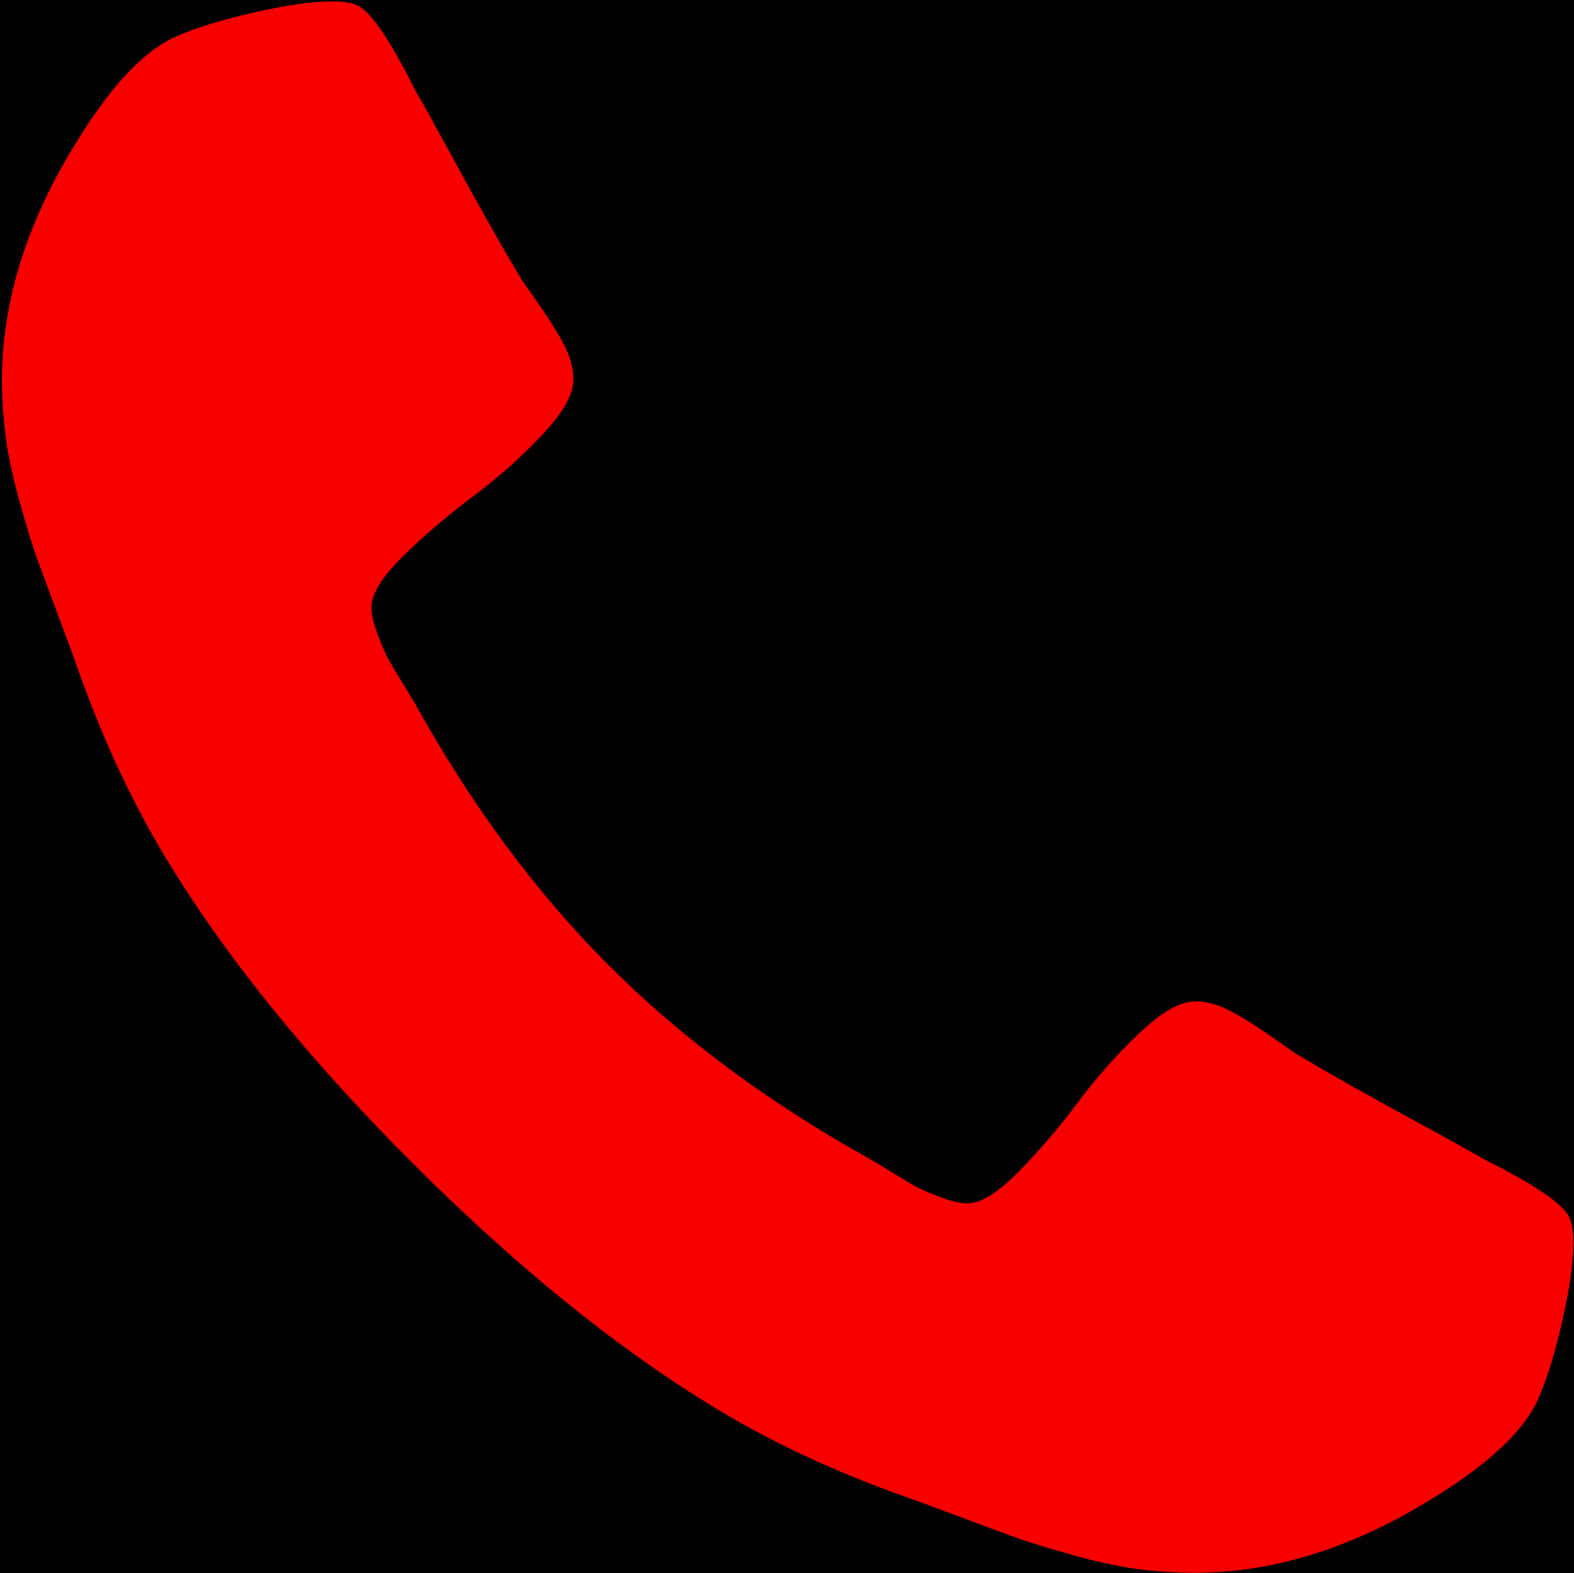 A Red Telephone Receiver On A Black Background